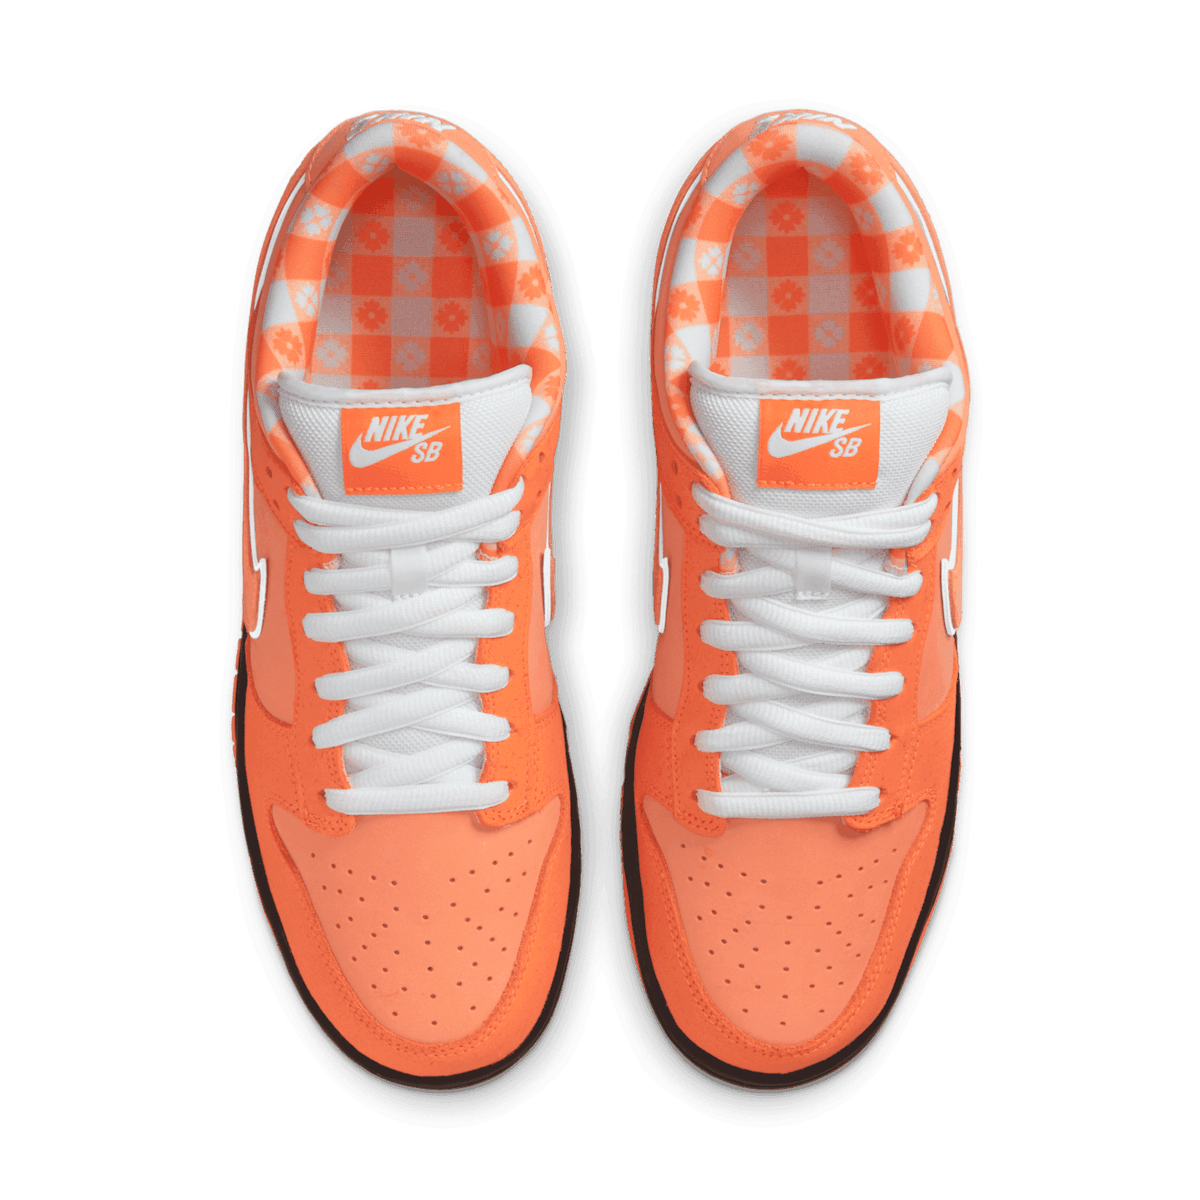 Nike Dunk SB Low Concepts Orange Lobster - FD8776-800 Raffles and Release  Date